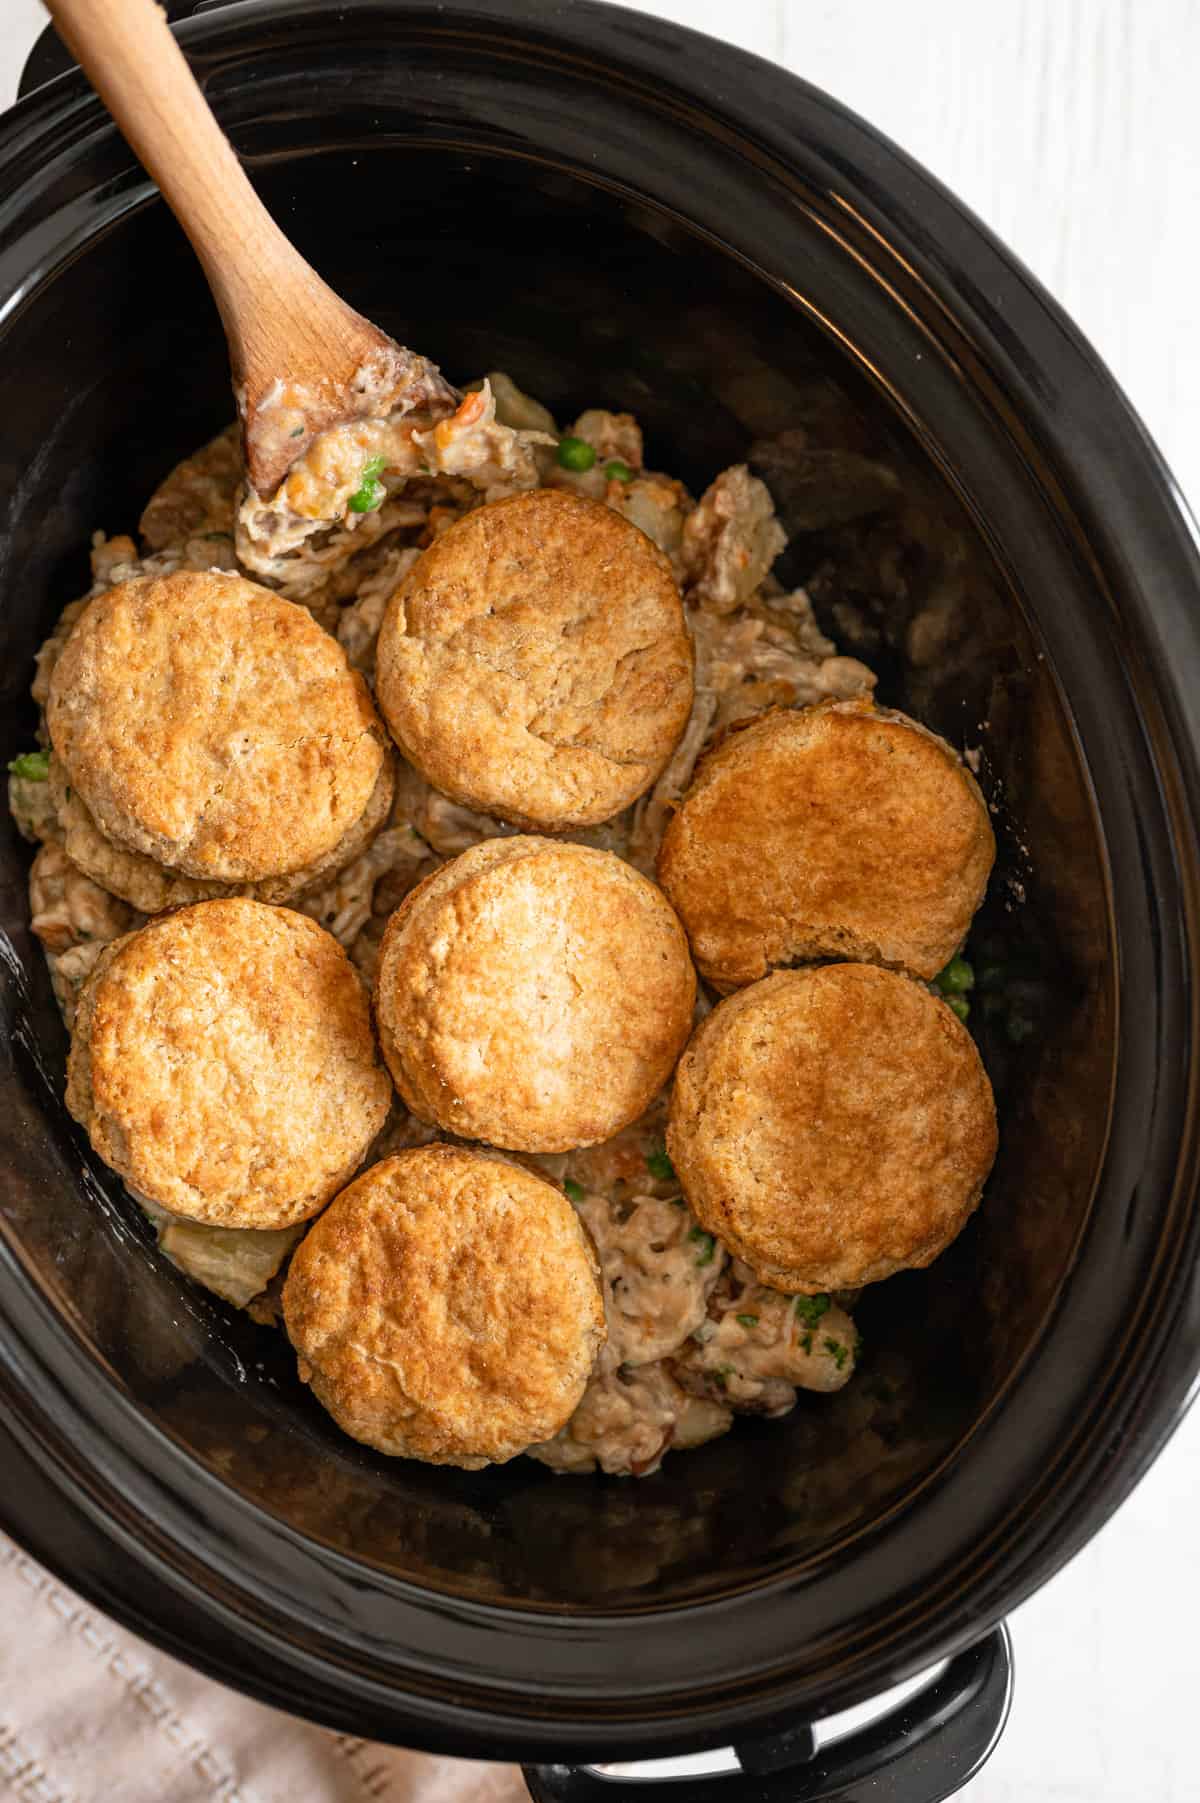 Chicken pot pie mixture in a crock pot with biscuits on top.